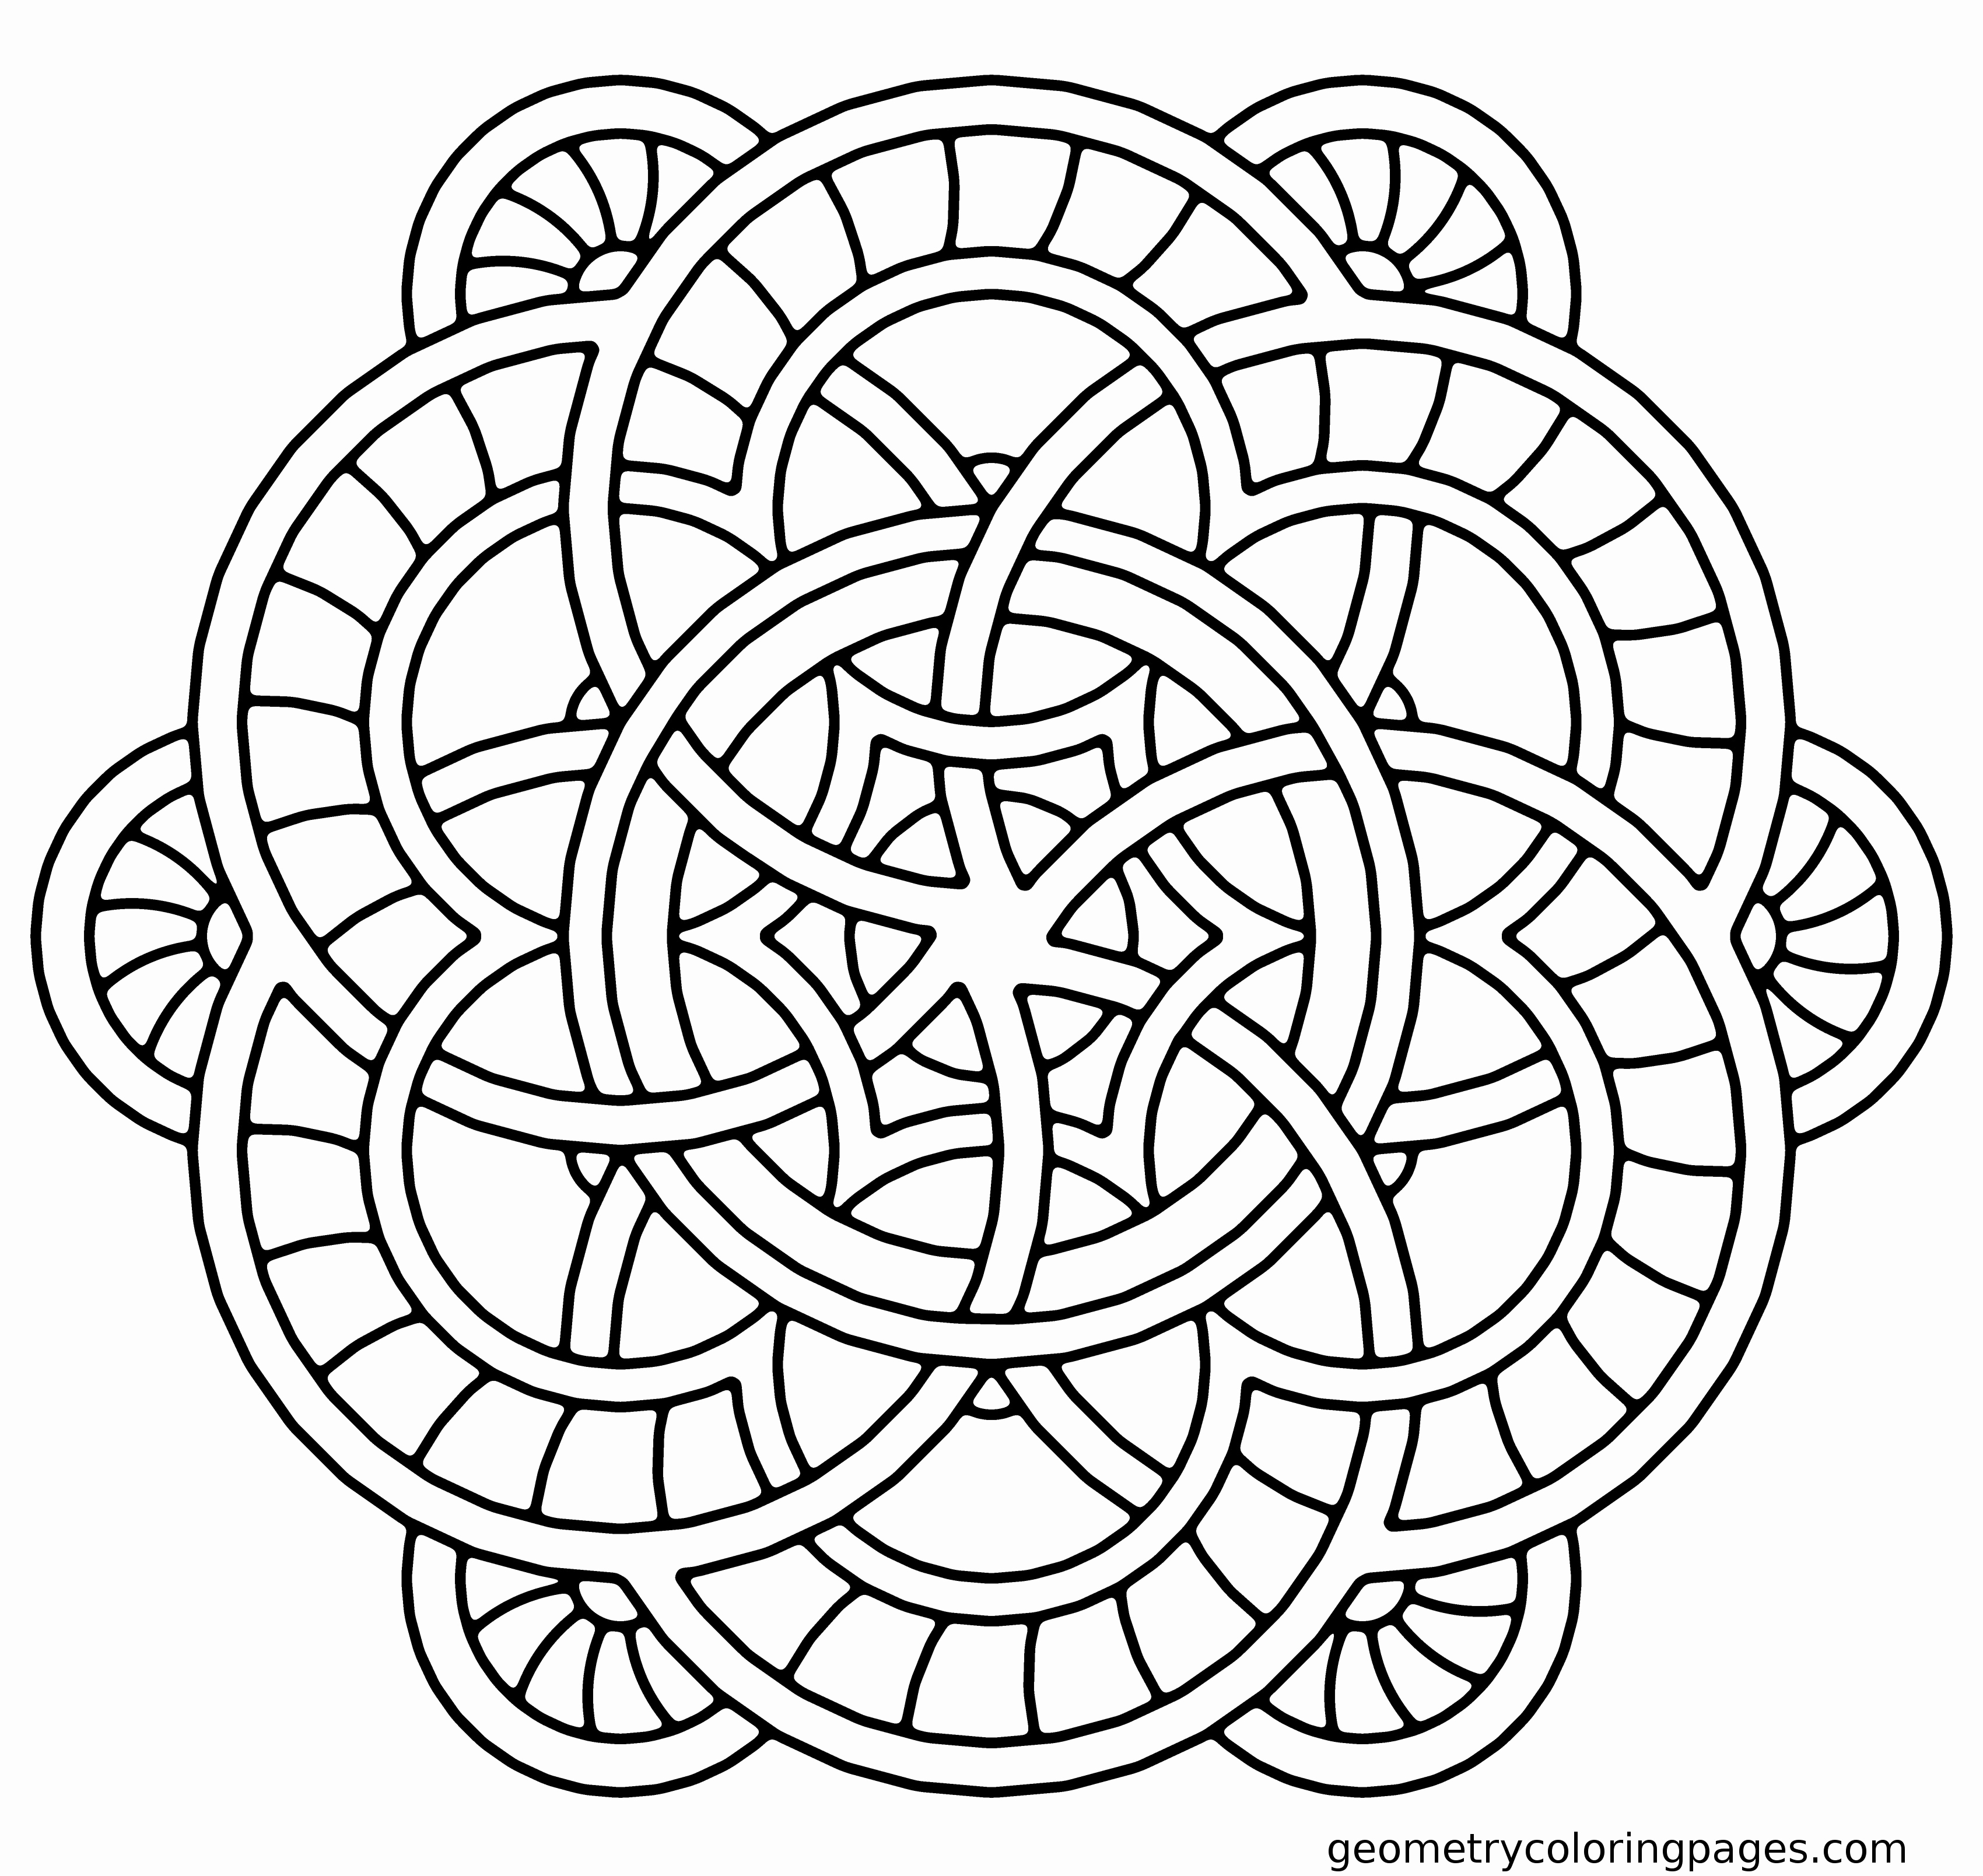 Mandala Coloring Pages Free Online Coloring Ideas Free Online Mandalaoloring Pages For Adultshristmas